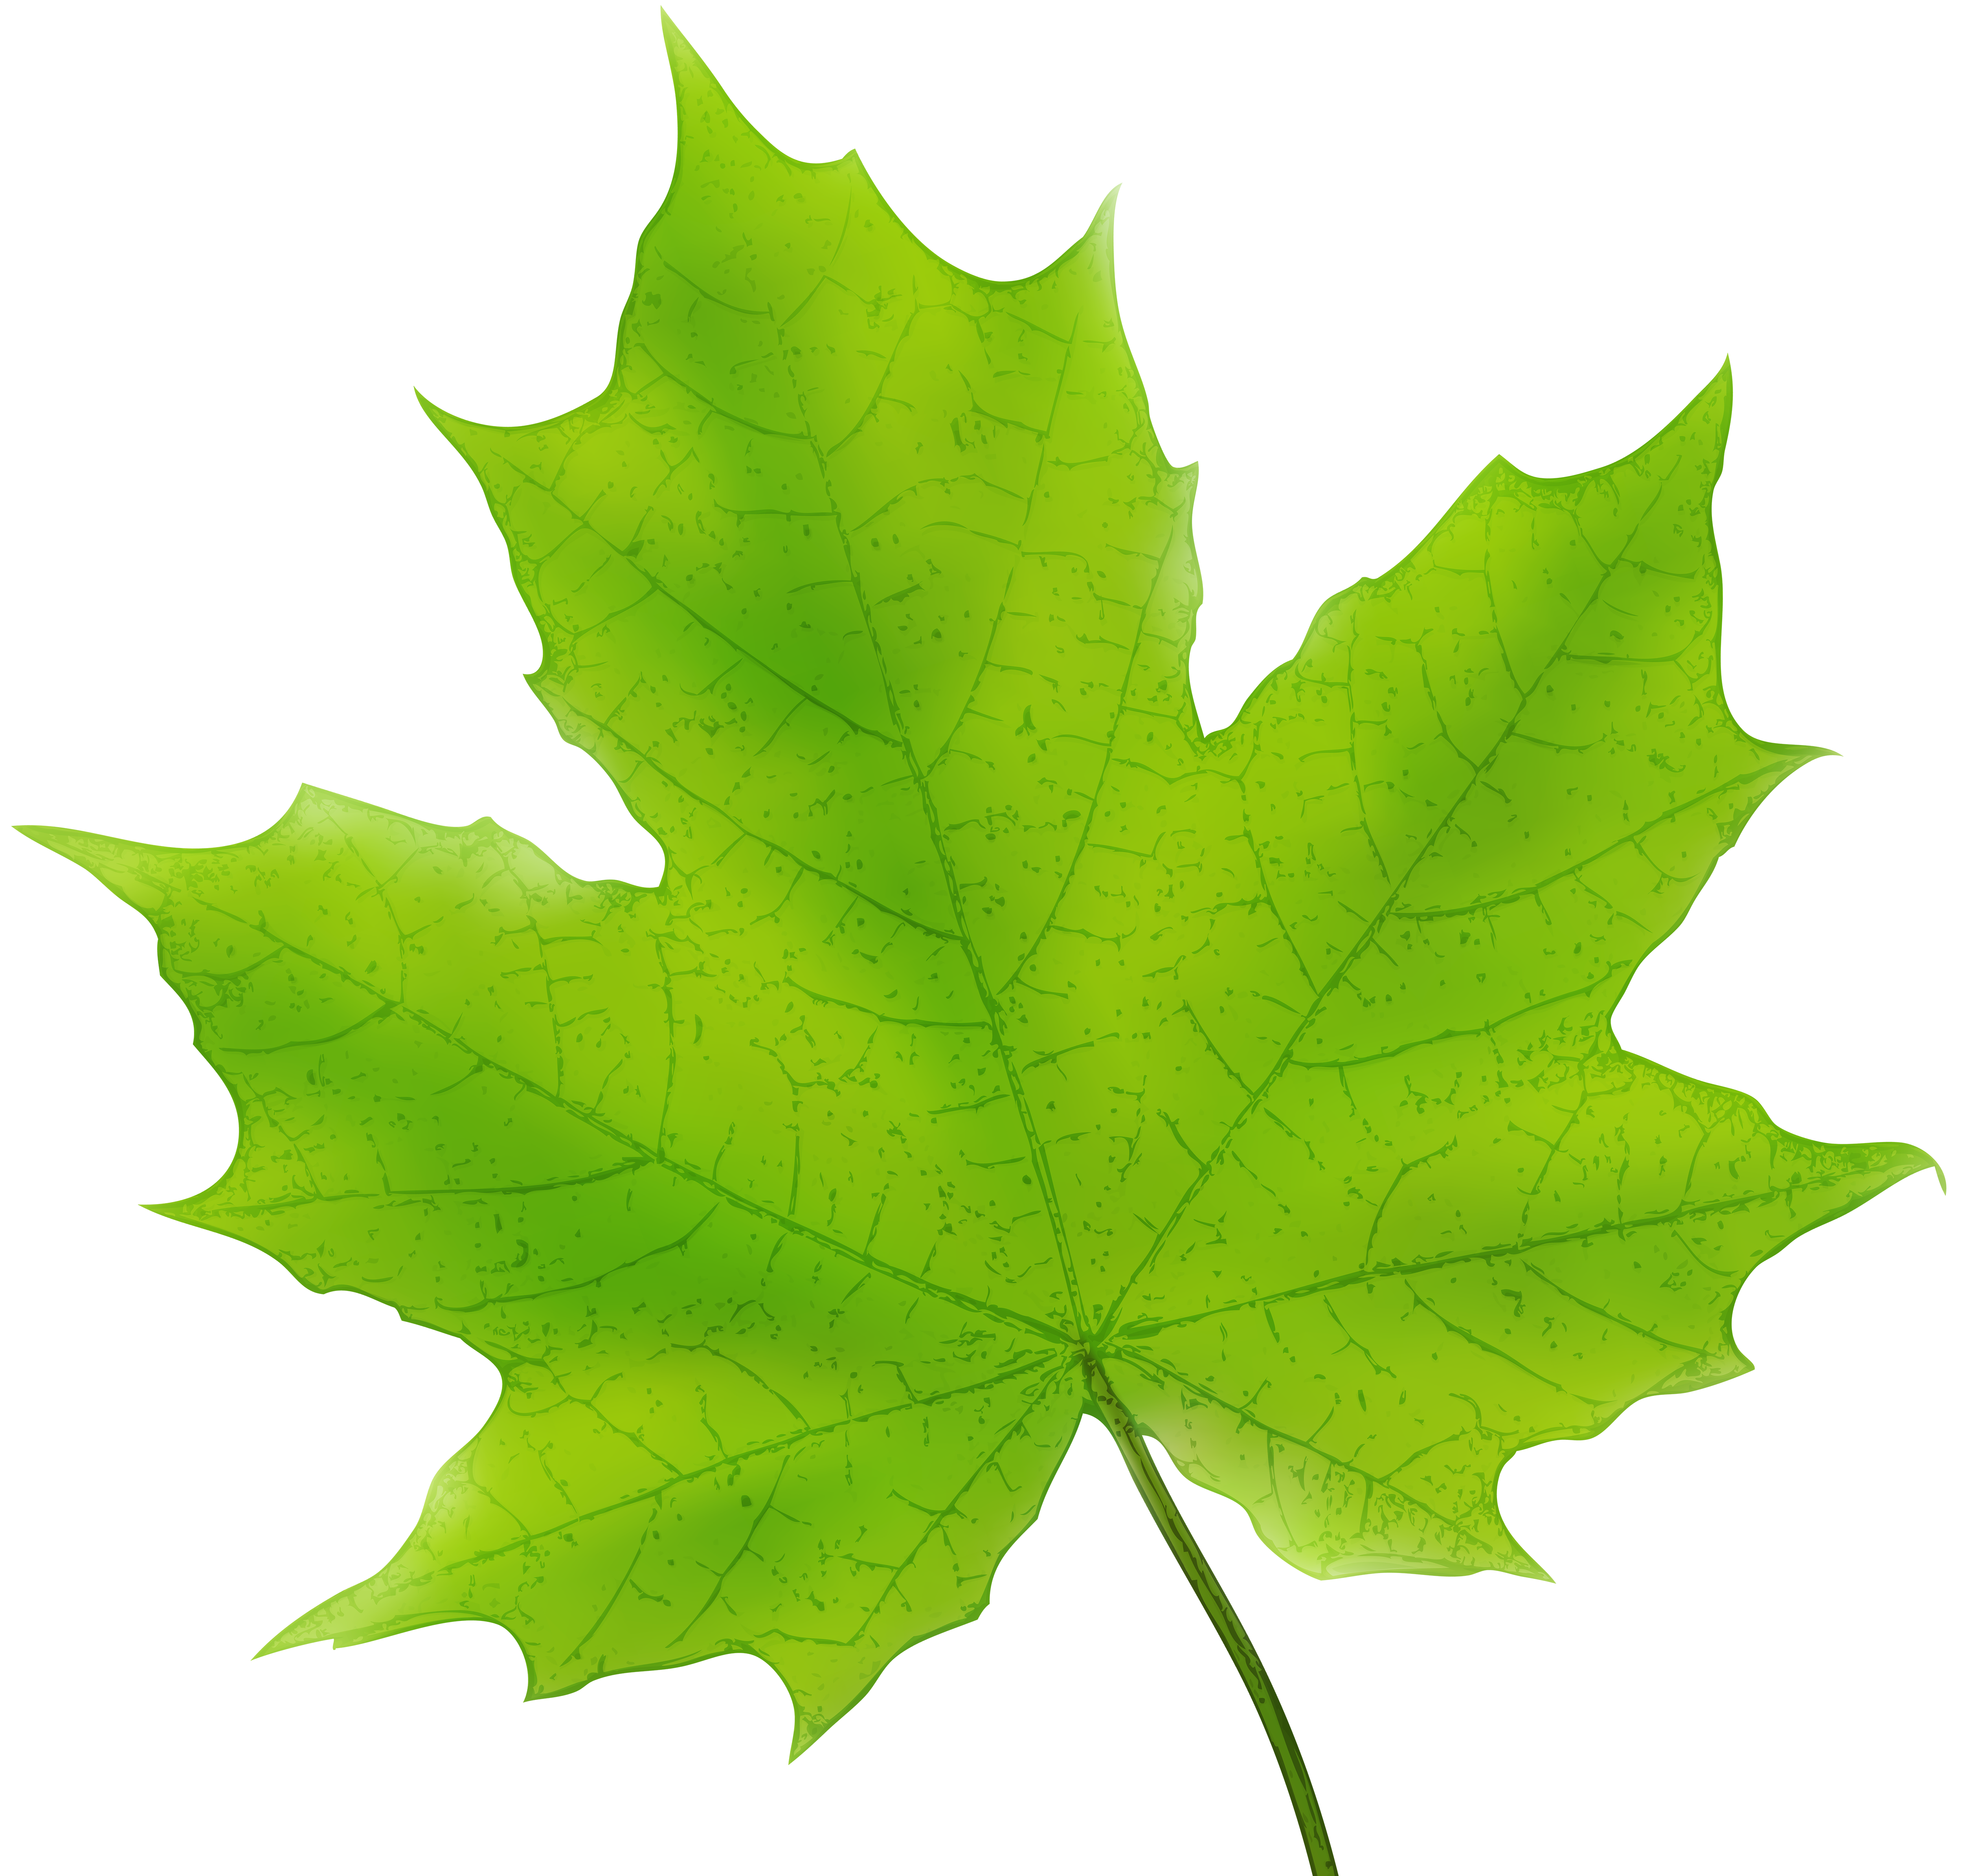 https://gallery.yopriceville.com/var/albums/Free-Clipart-Pictures/Decorative-Elements-PNG/Maple_Leaf_Green_PNG_Clip_Art_Image.png?m=1508122502